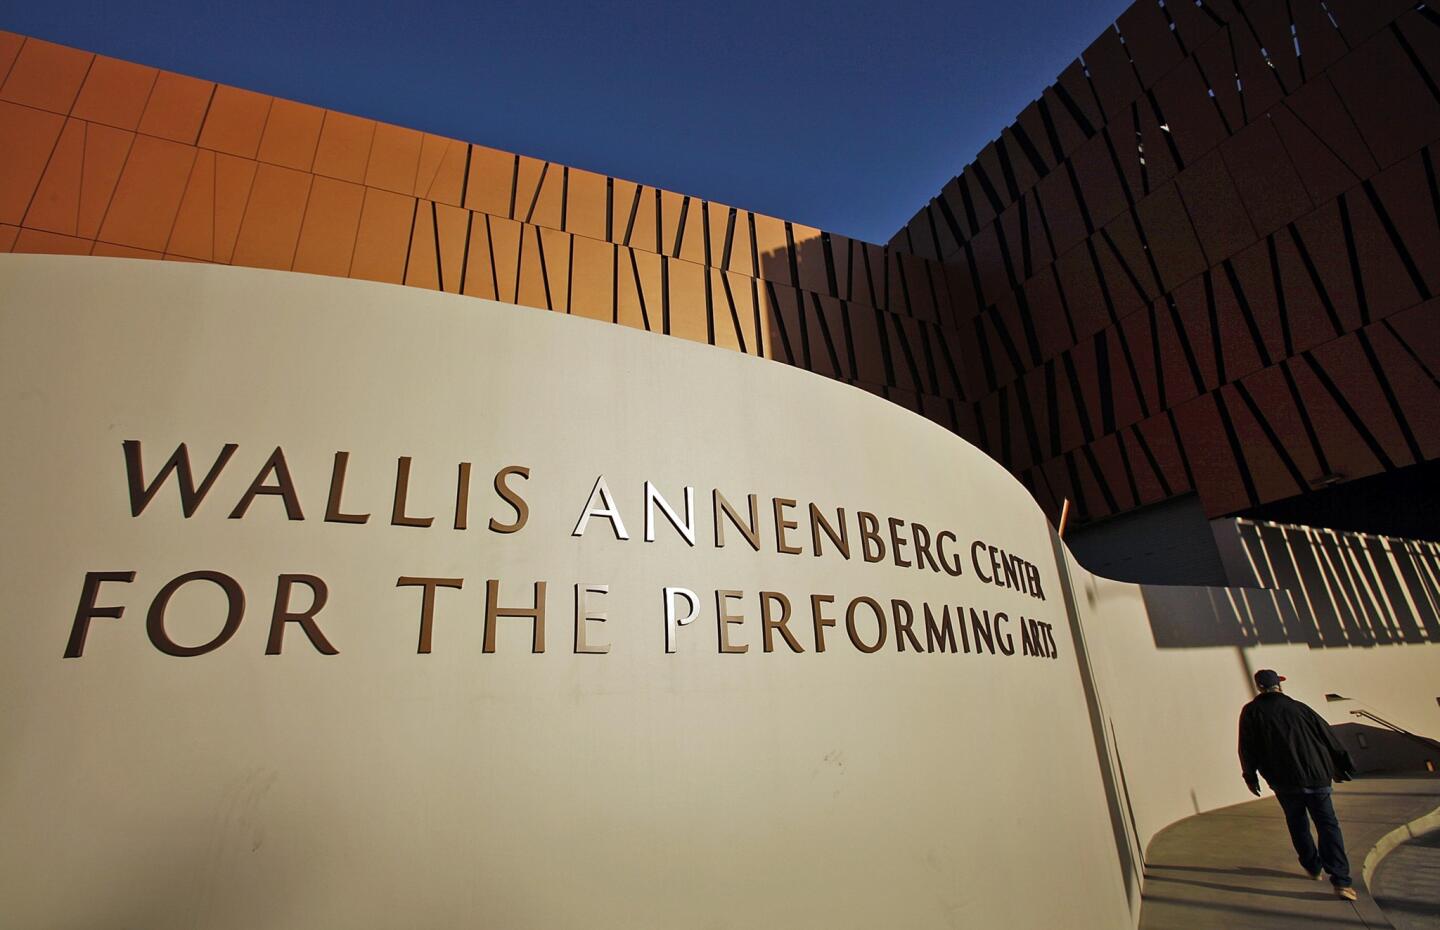 The Wallis Annenberg Center for the Performing Arts located on a 2.5-acre site at the intersection of Santa Monica Boulevard and Canon Drive in Beverly Hills on October 30, 2013. The site includes the expanded 1934 Beverly Hills Post Office and a new 500-seat Bram Goldsmith Theater designed by SPF architect Zoltan Pali.